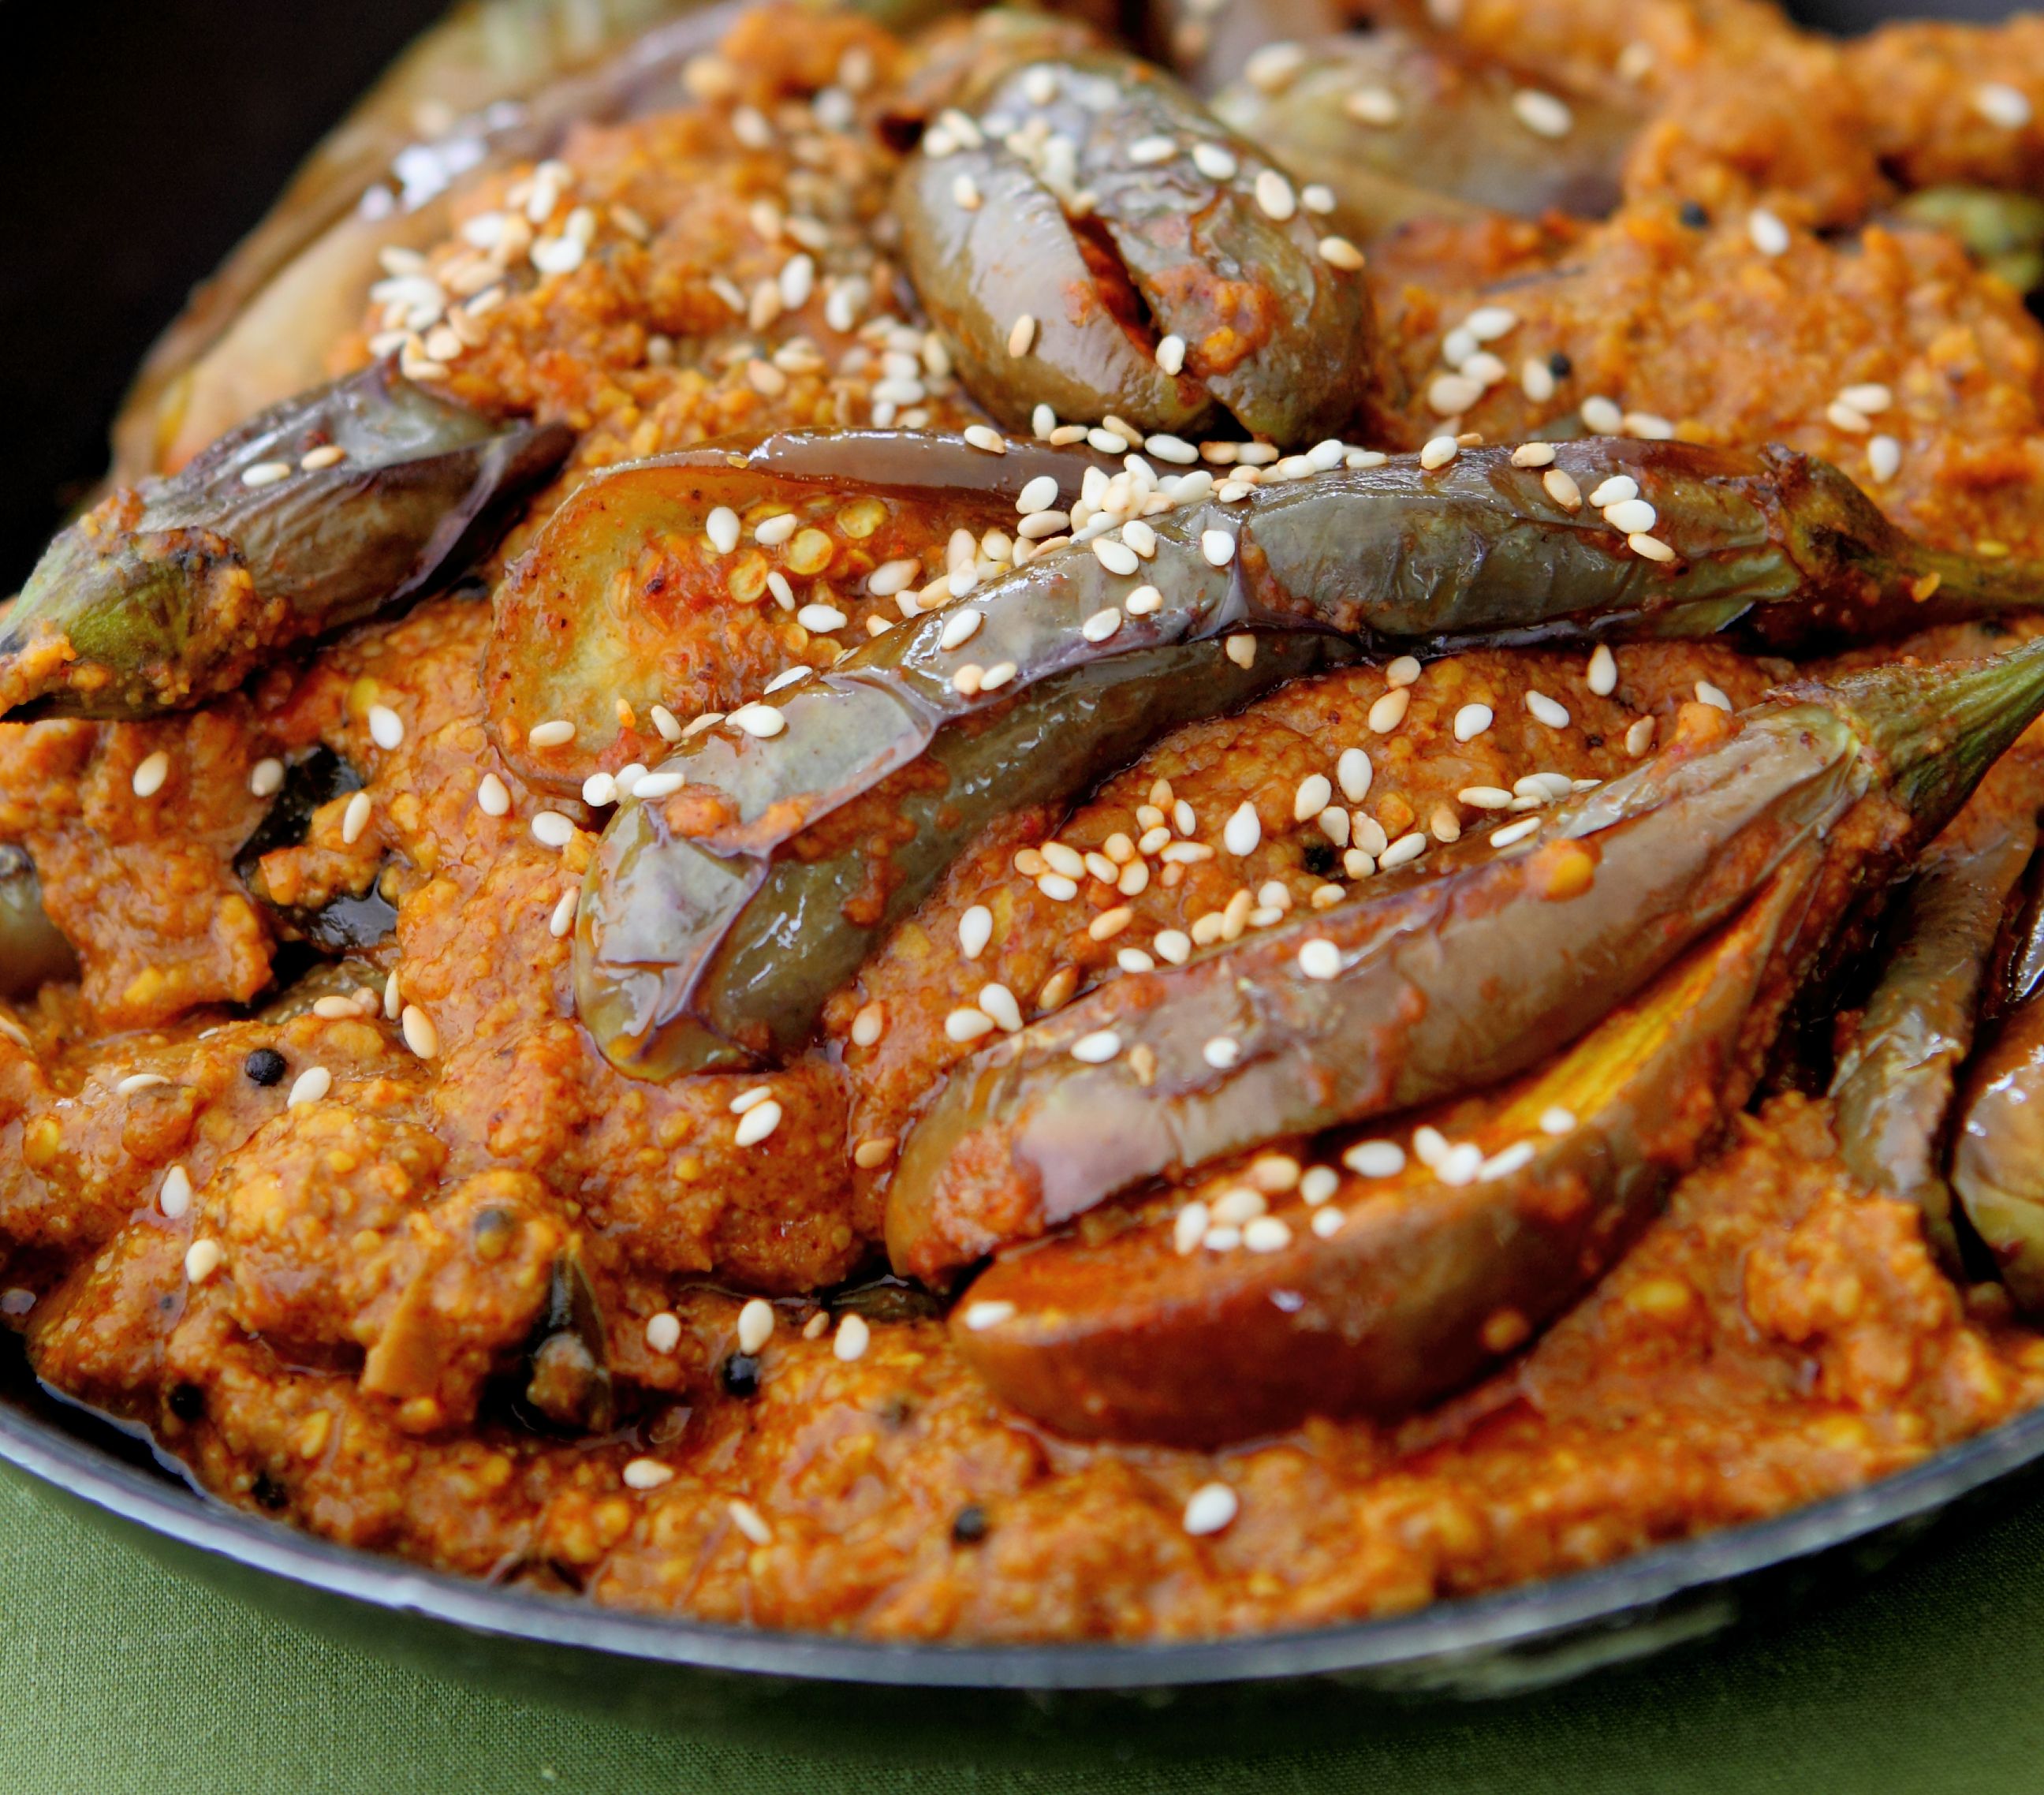 Baingan Masala (Brinjals cooked in Spices)